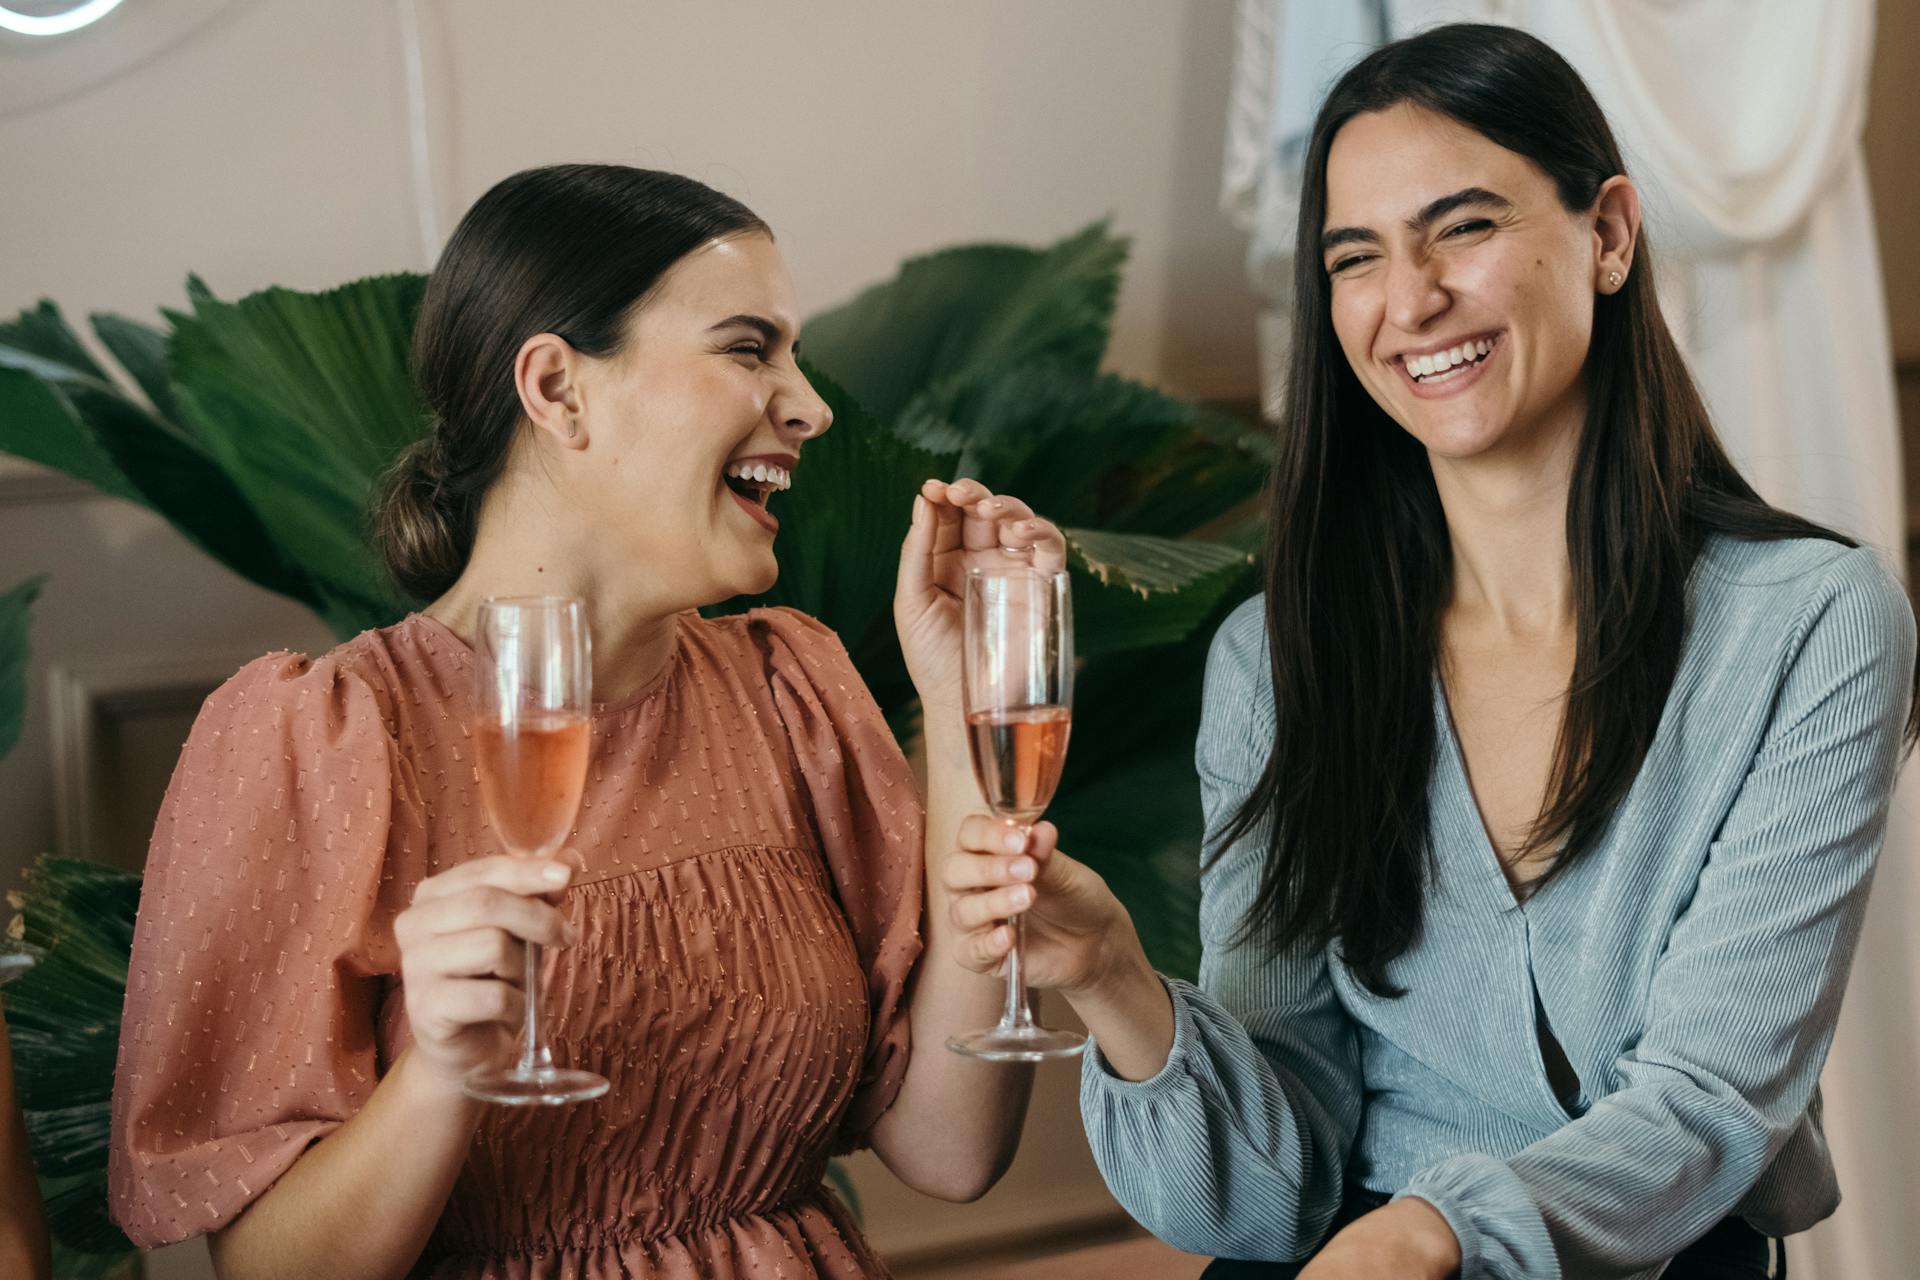 Two women laughing while holding drinks at a party | Source: Pexels